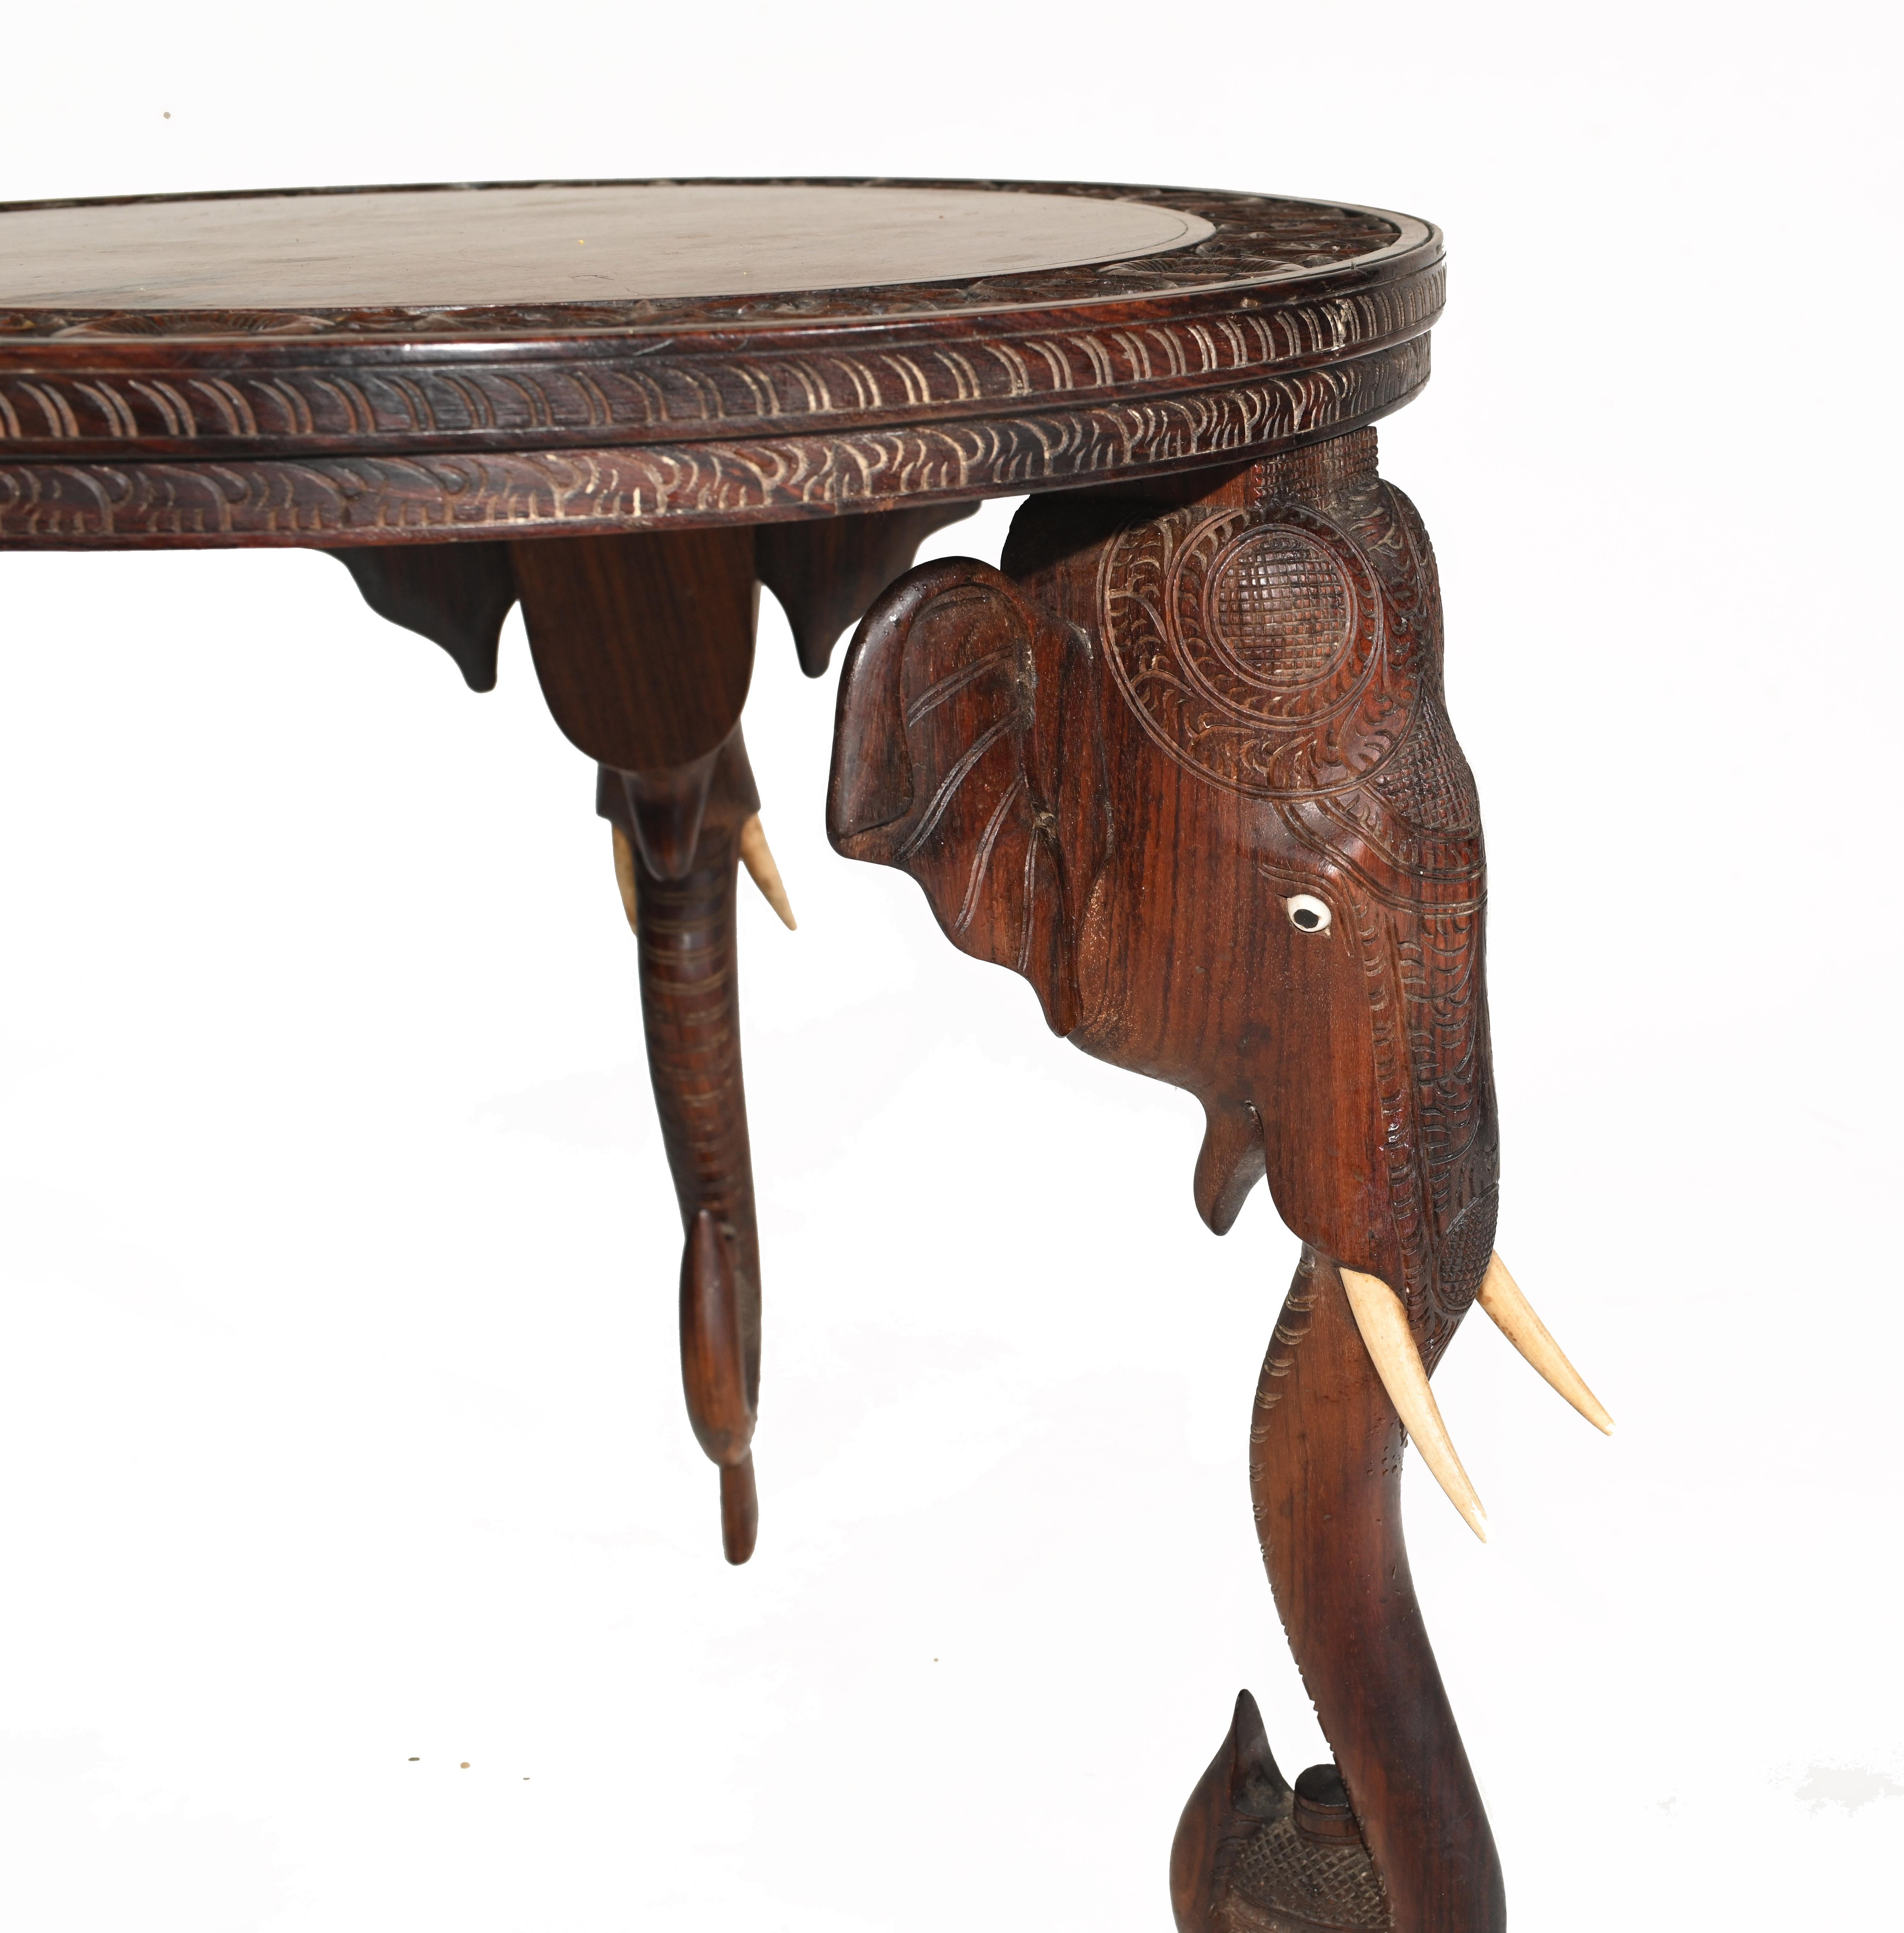 Gorgeous Burmese side table with hand carved elephant legs
Very distinctive look on this table we date to circa 1890
Some of our items are in storage so please check ahead of a viewing to see if it is on our shop floor
Offered in great shape